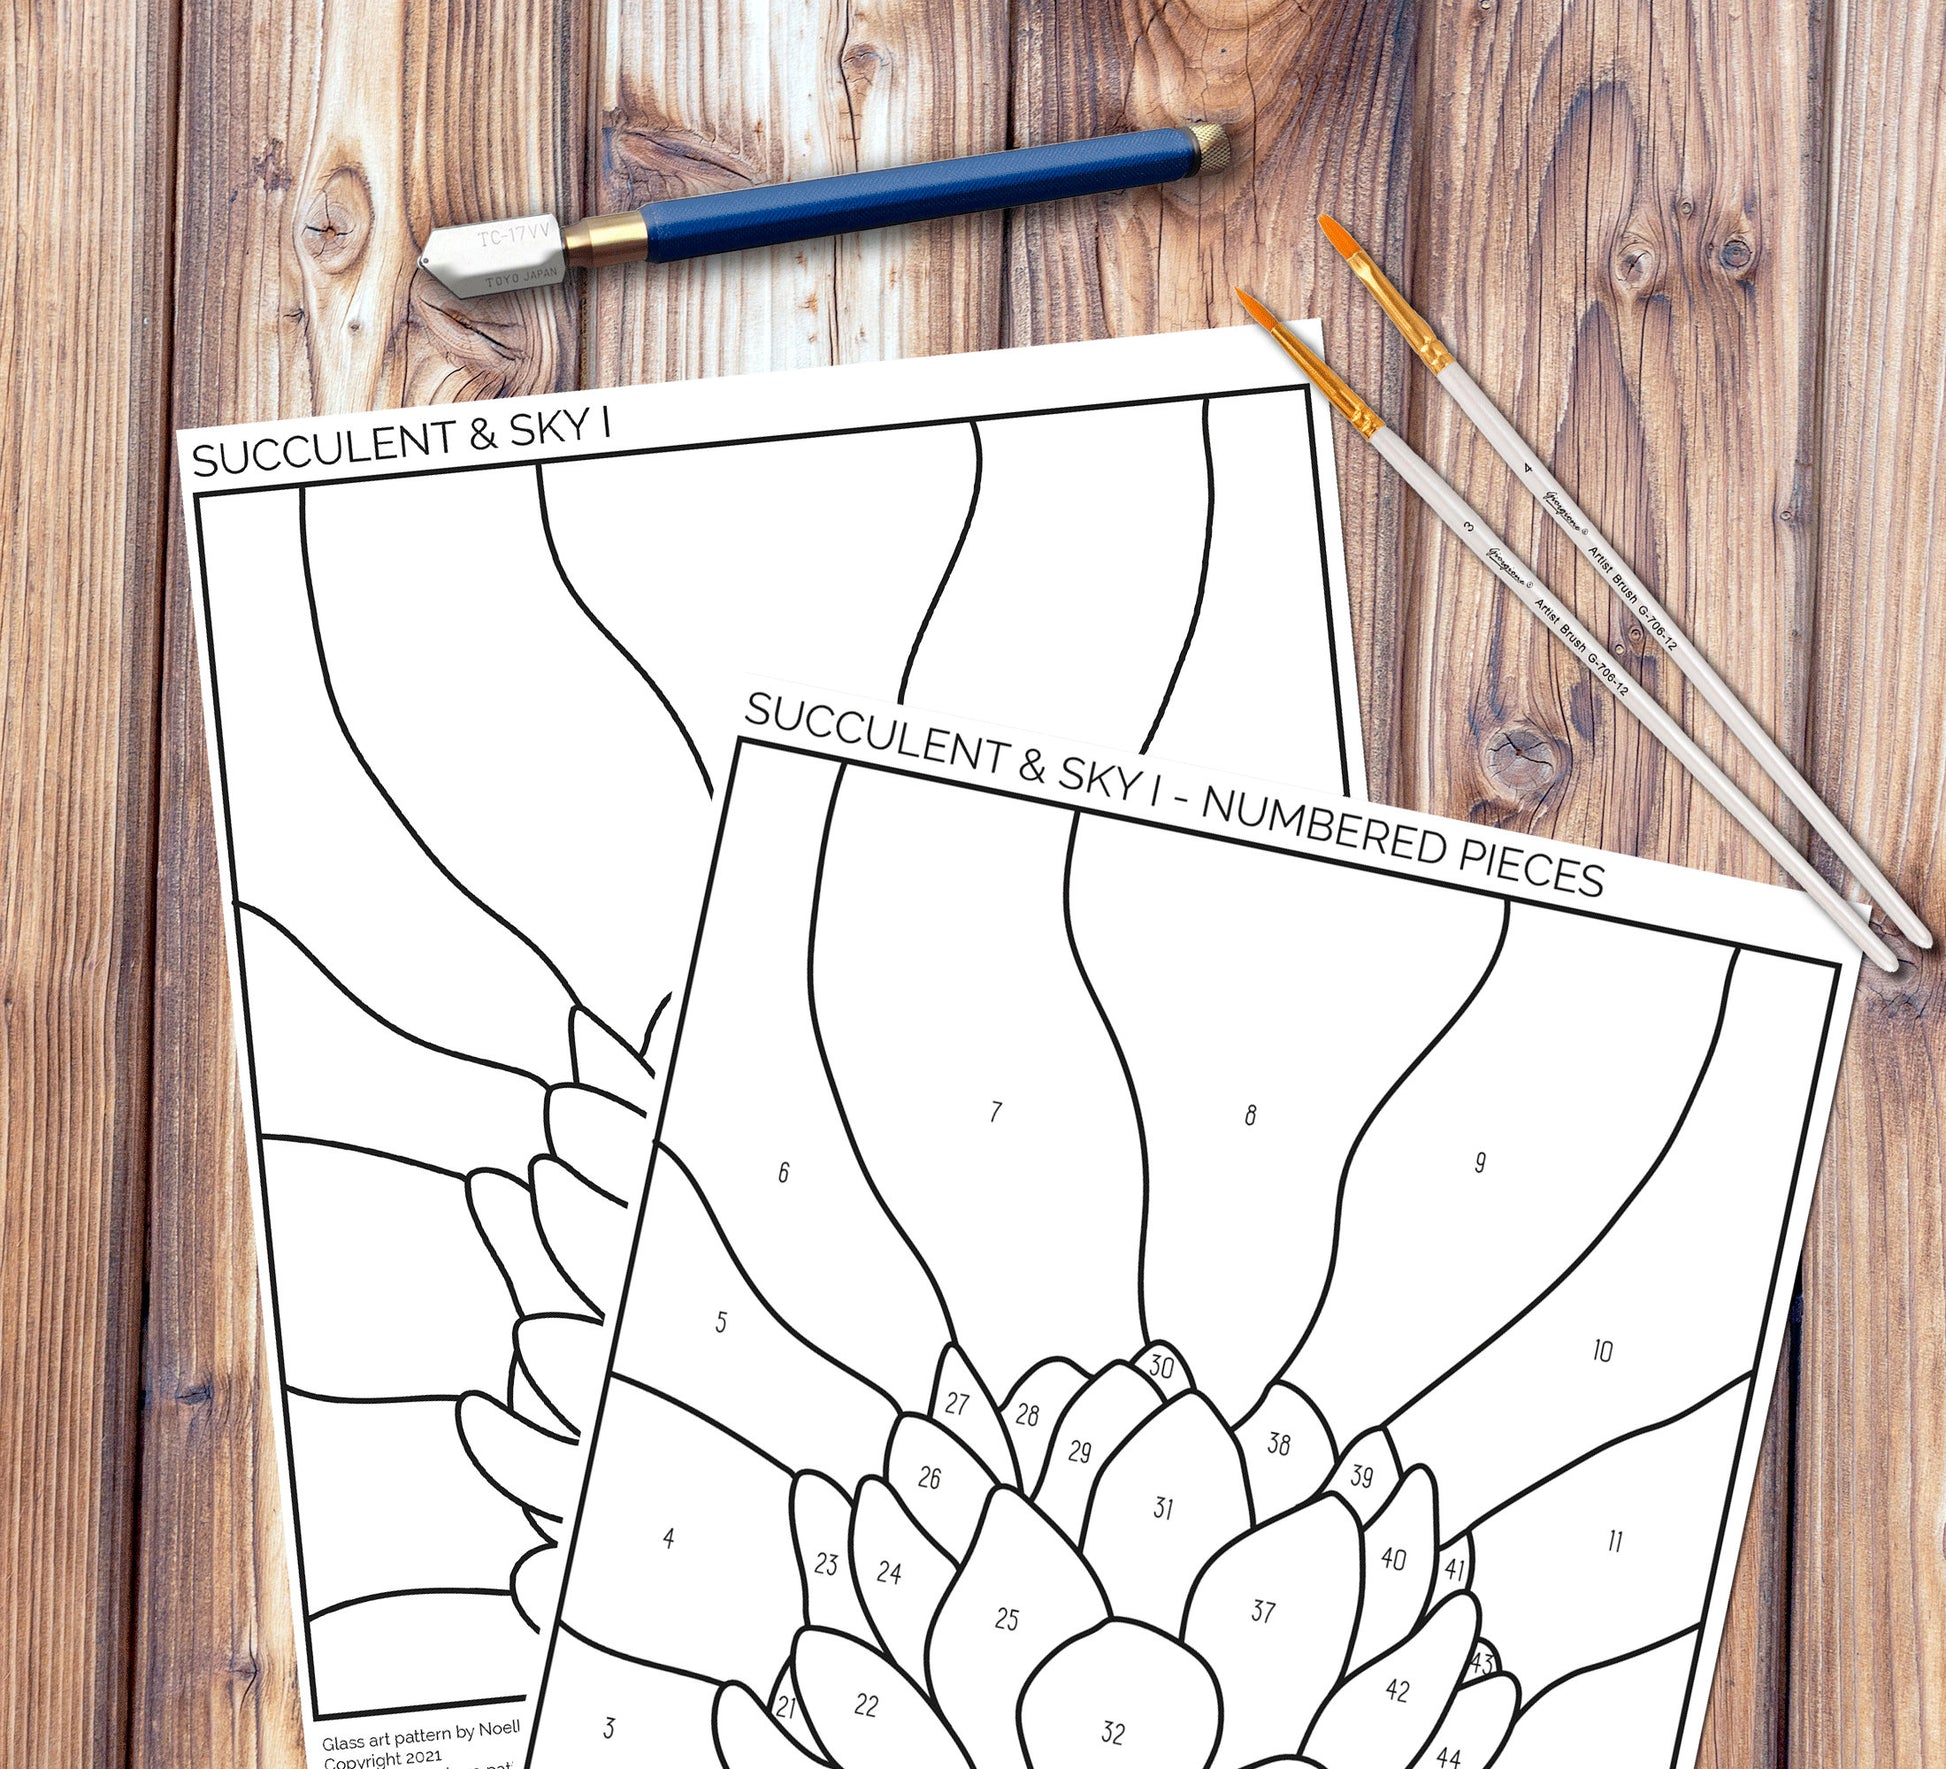 Sample of the clean and numbered stained glass patterns included with purchase of this succulent stained glass pattern download